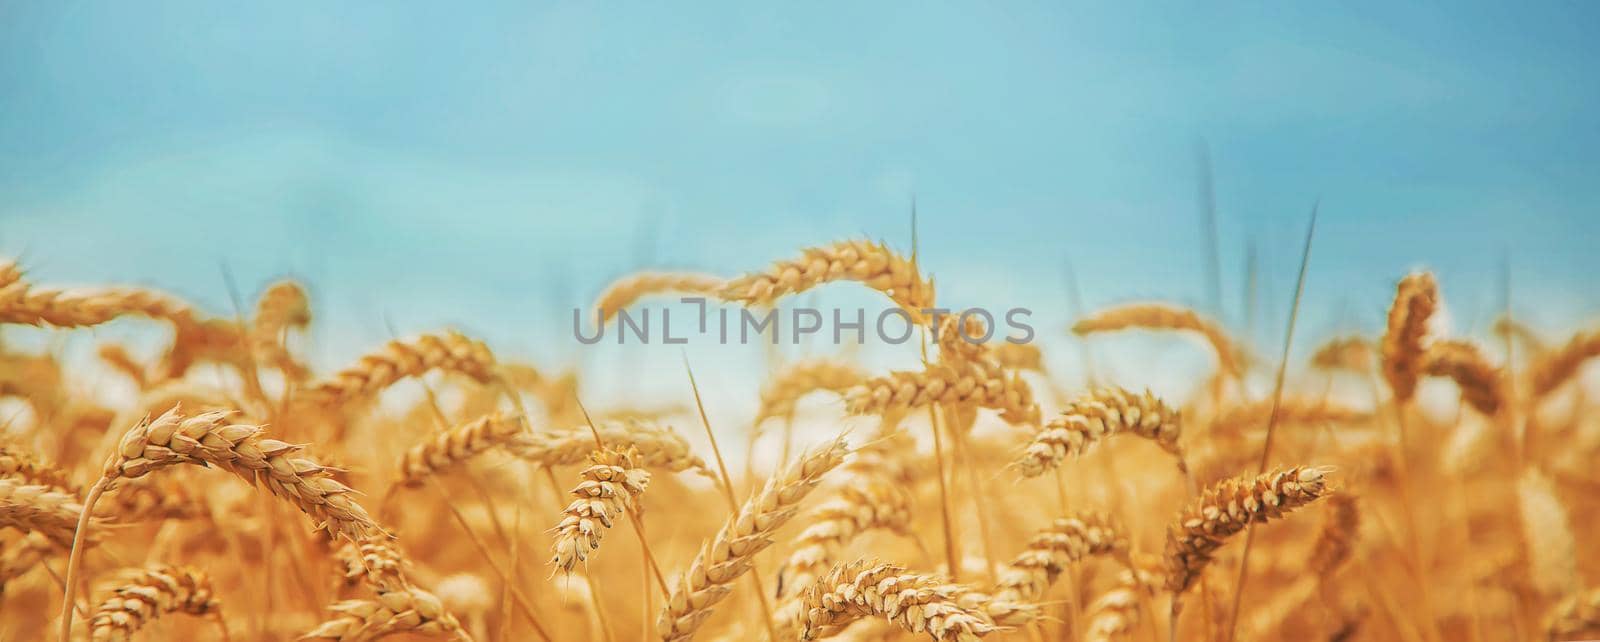 Wheat field on a sunny day. Selective focus. nature.